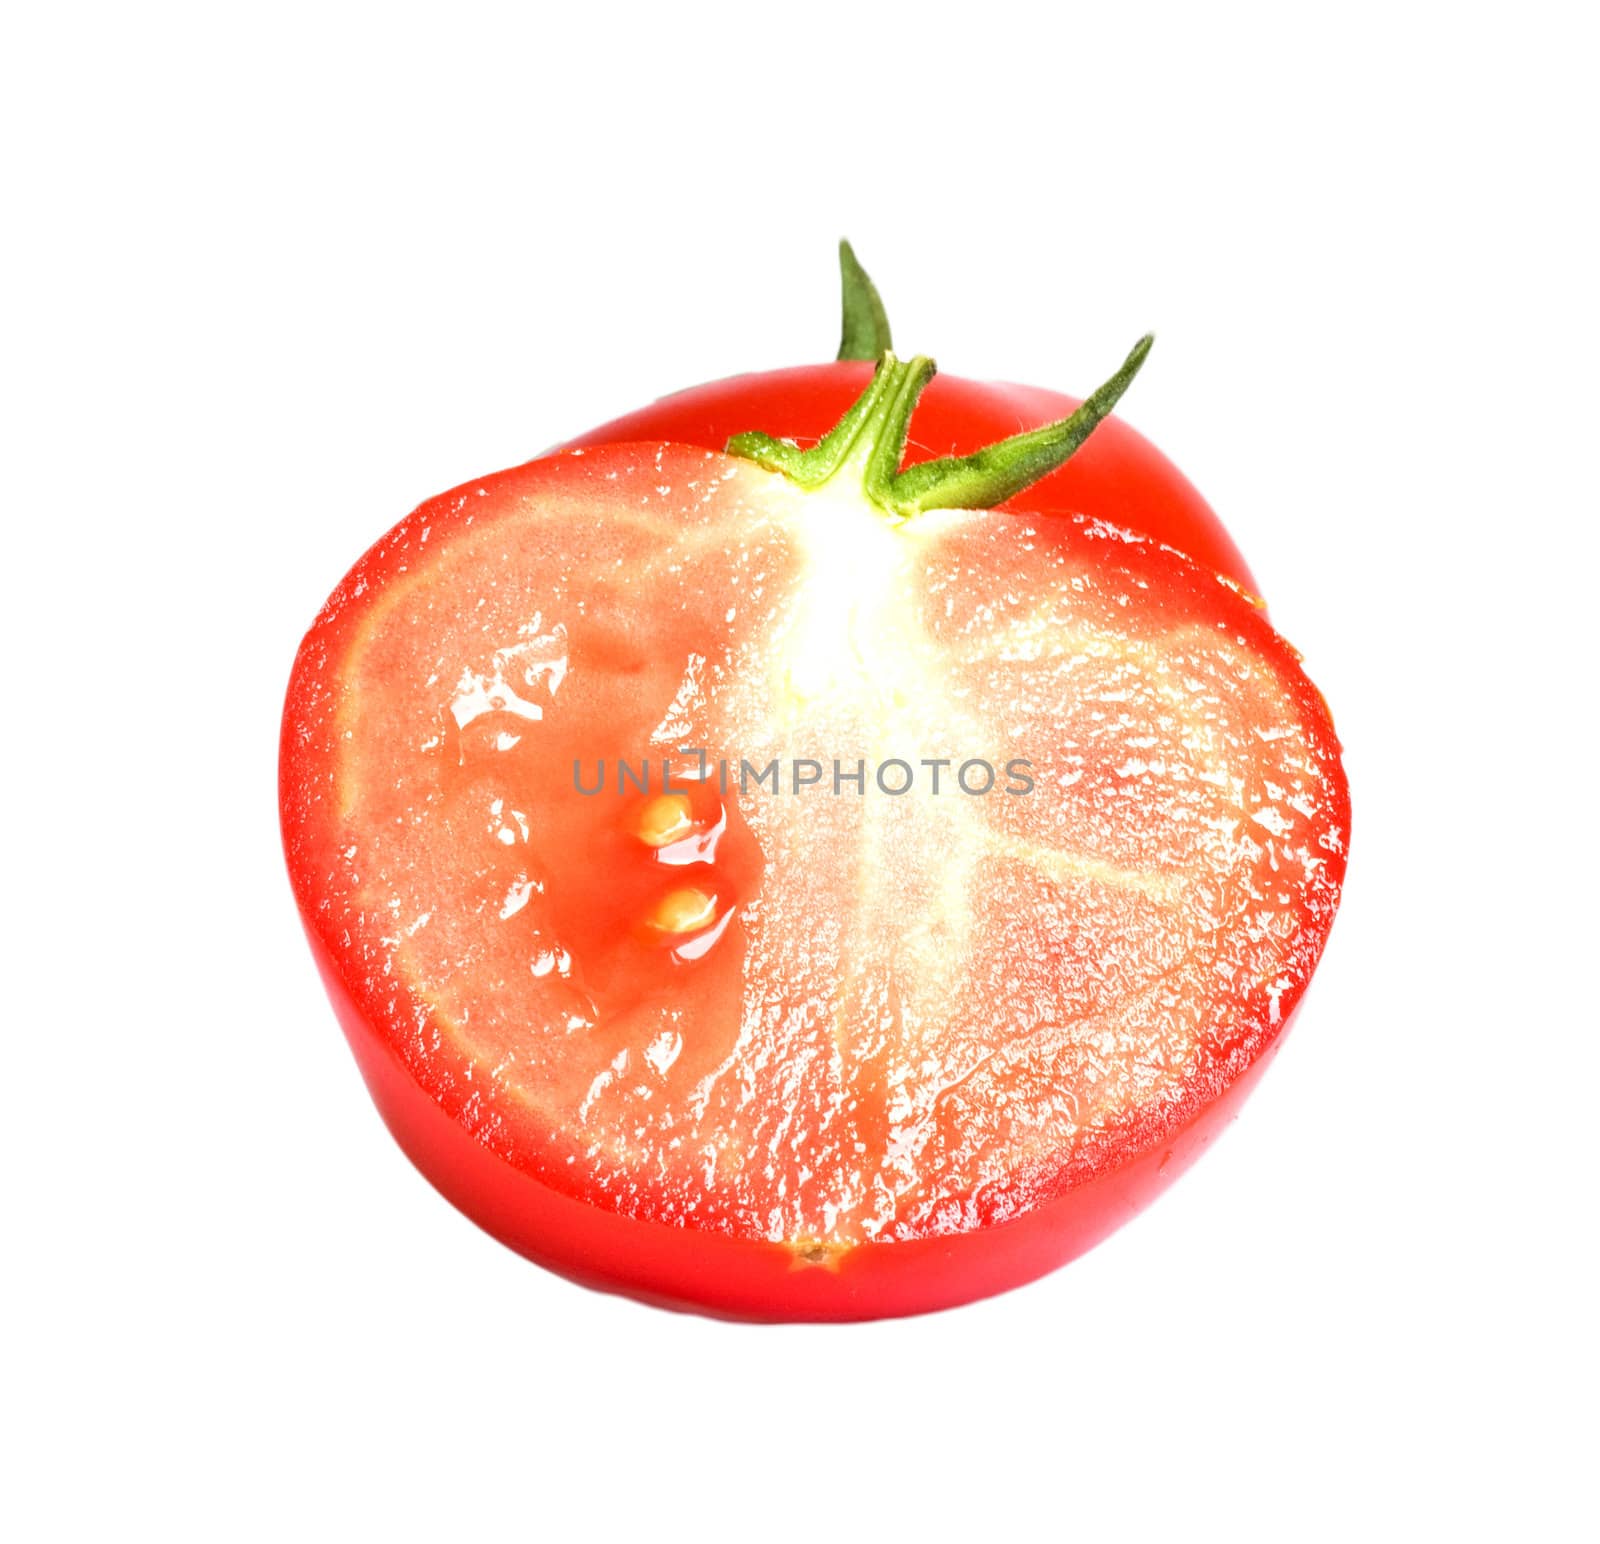 red tomato vegetable with cut isolated on white background 